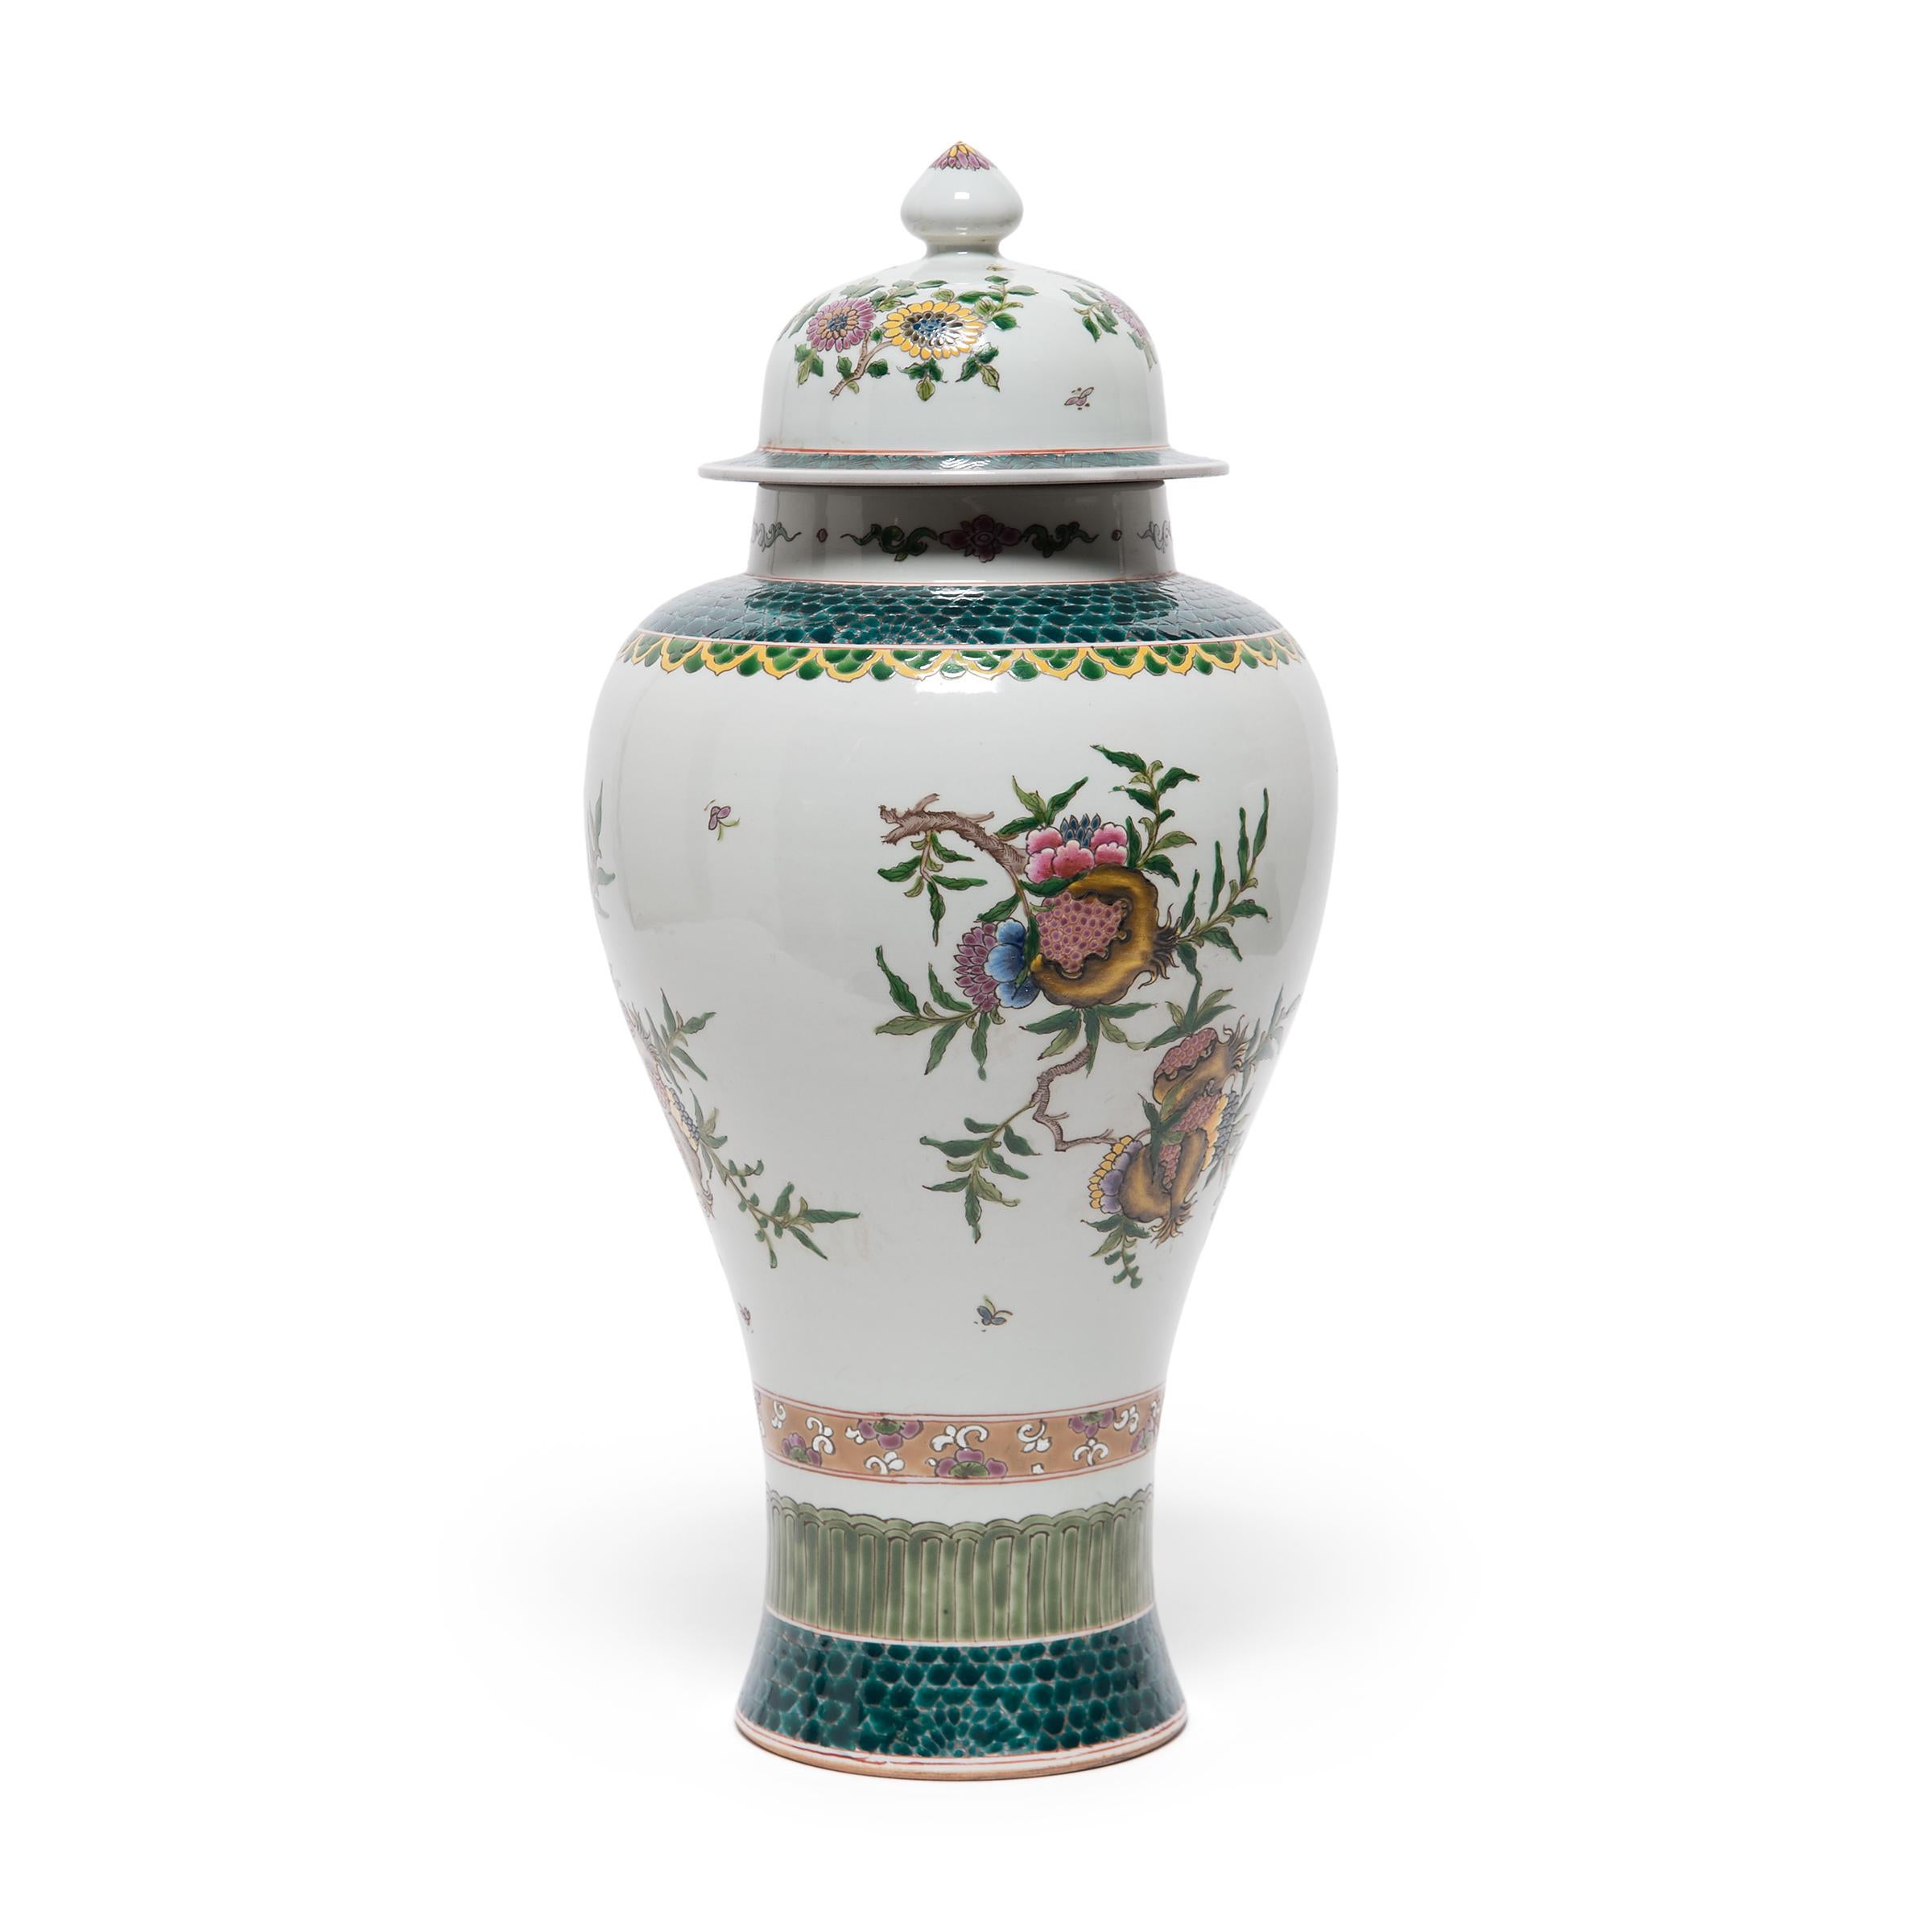 Chinese Export Pair of Chinese Famille Verte Baluster Jars with Pomegranates, c. 1900